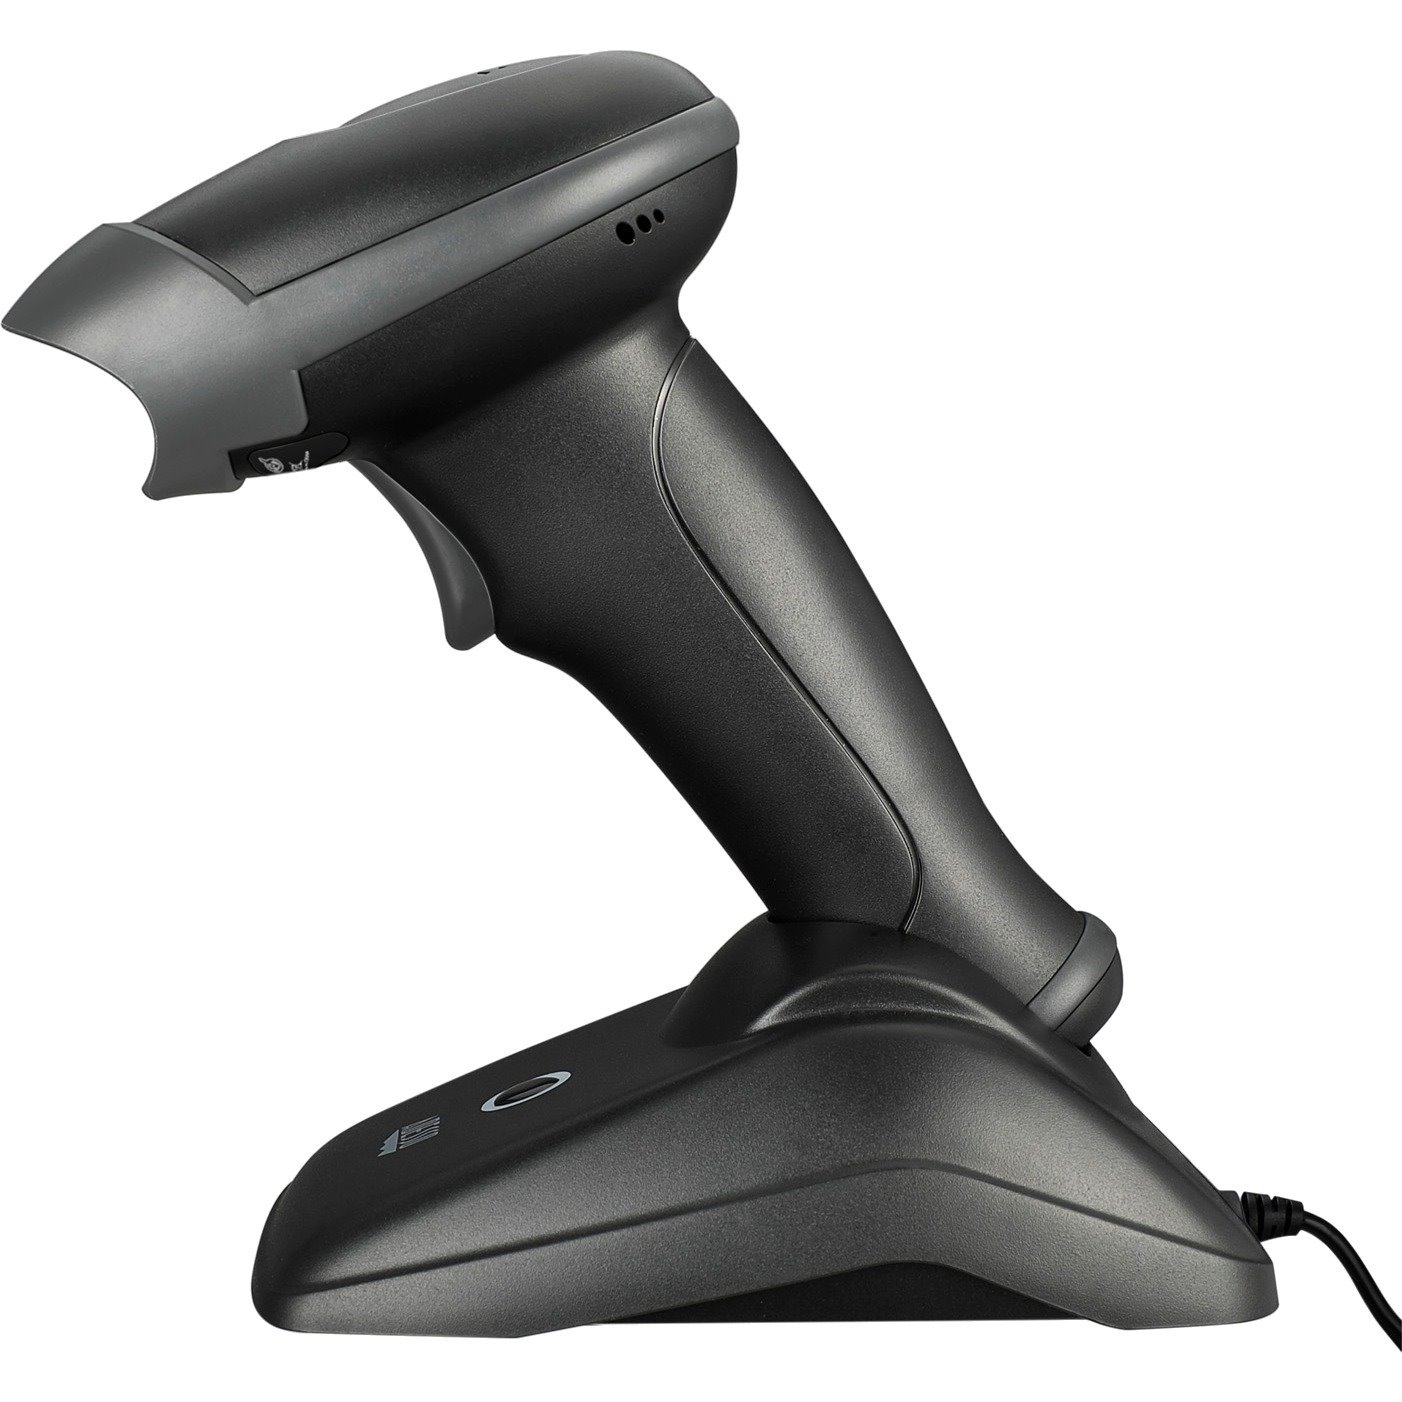 Adesso NuScan NuScan 2500CR Healthcare, Warehouse Handheld Barcode Scanner - Wireless Connectivity